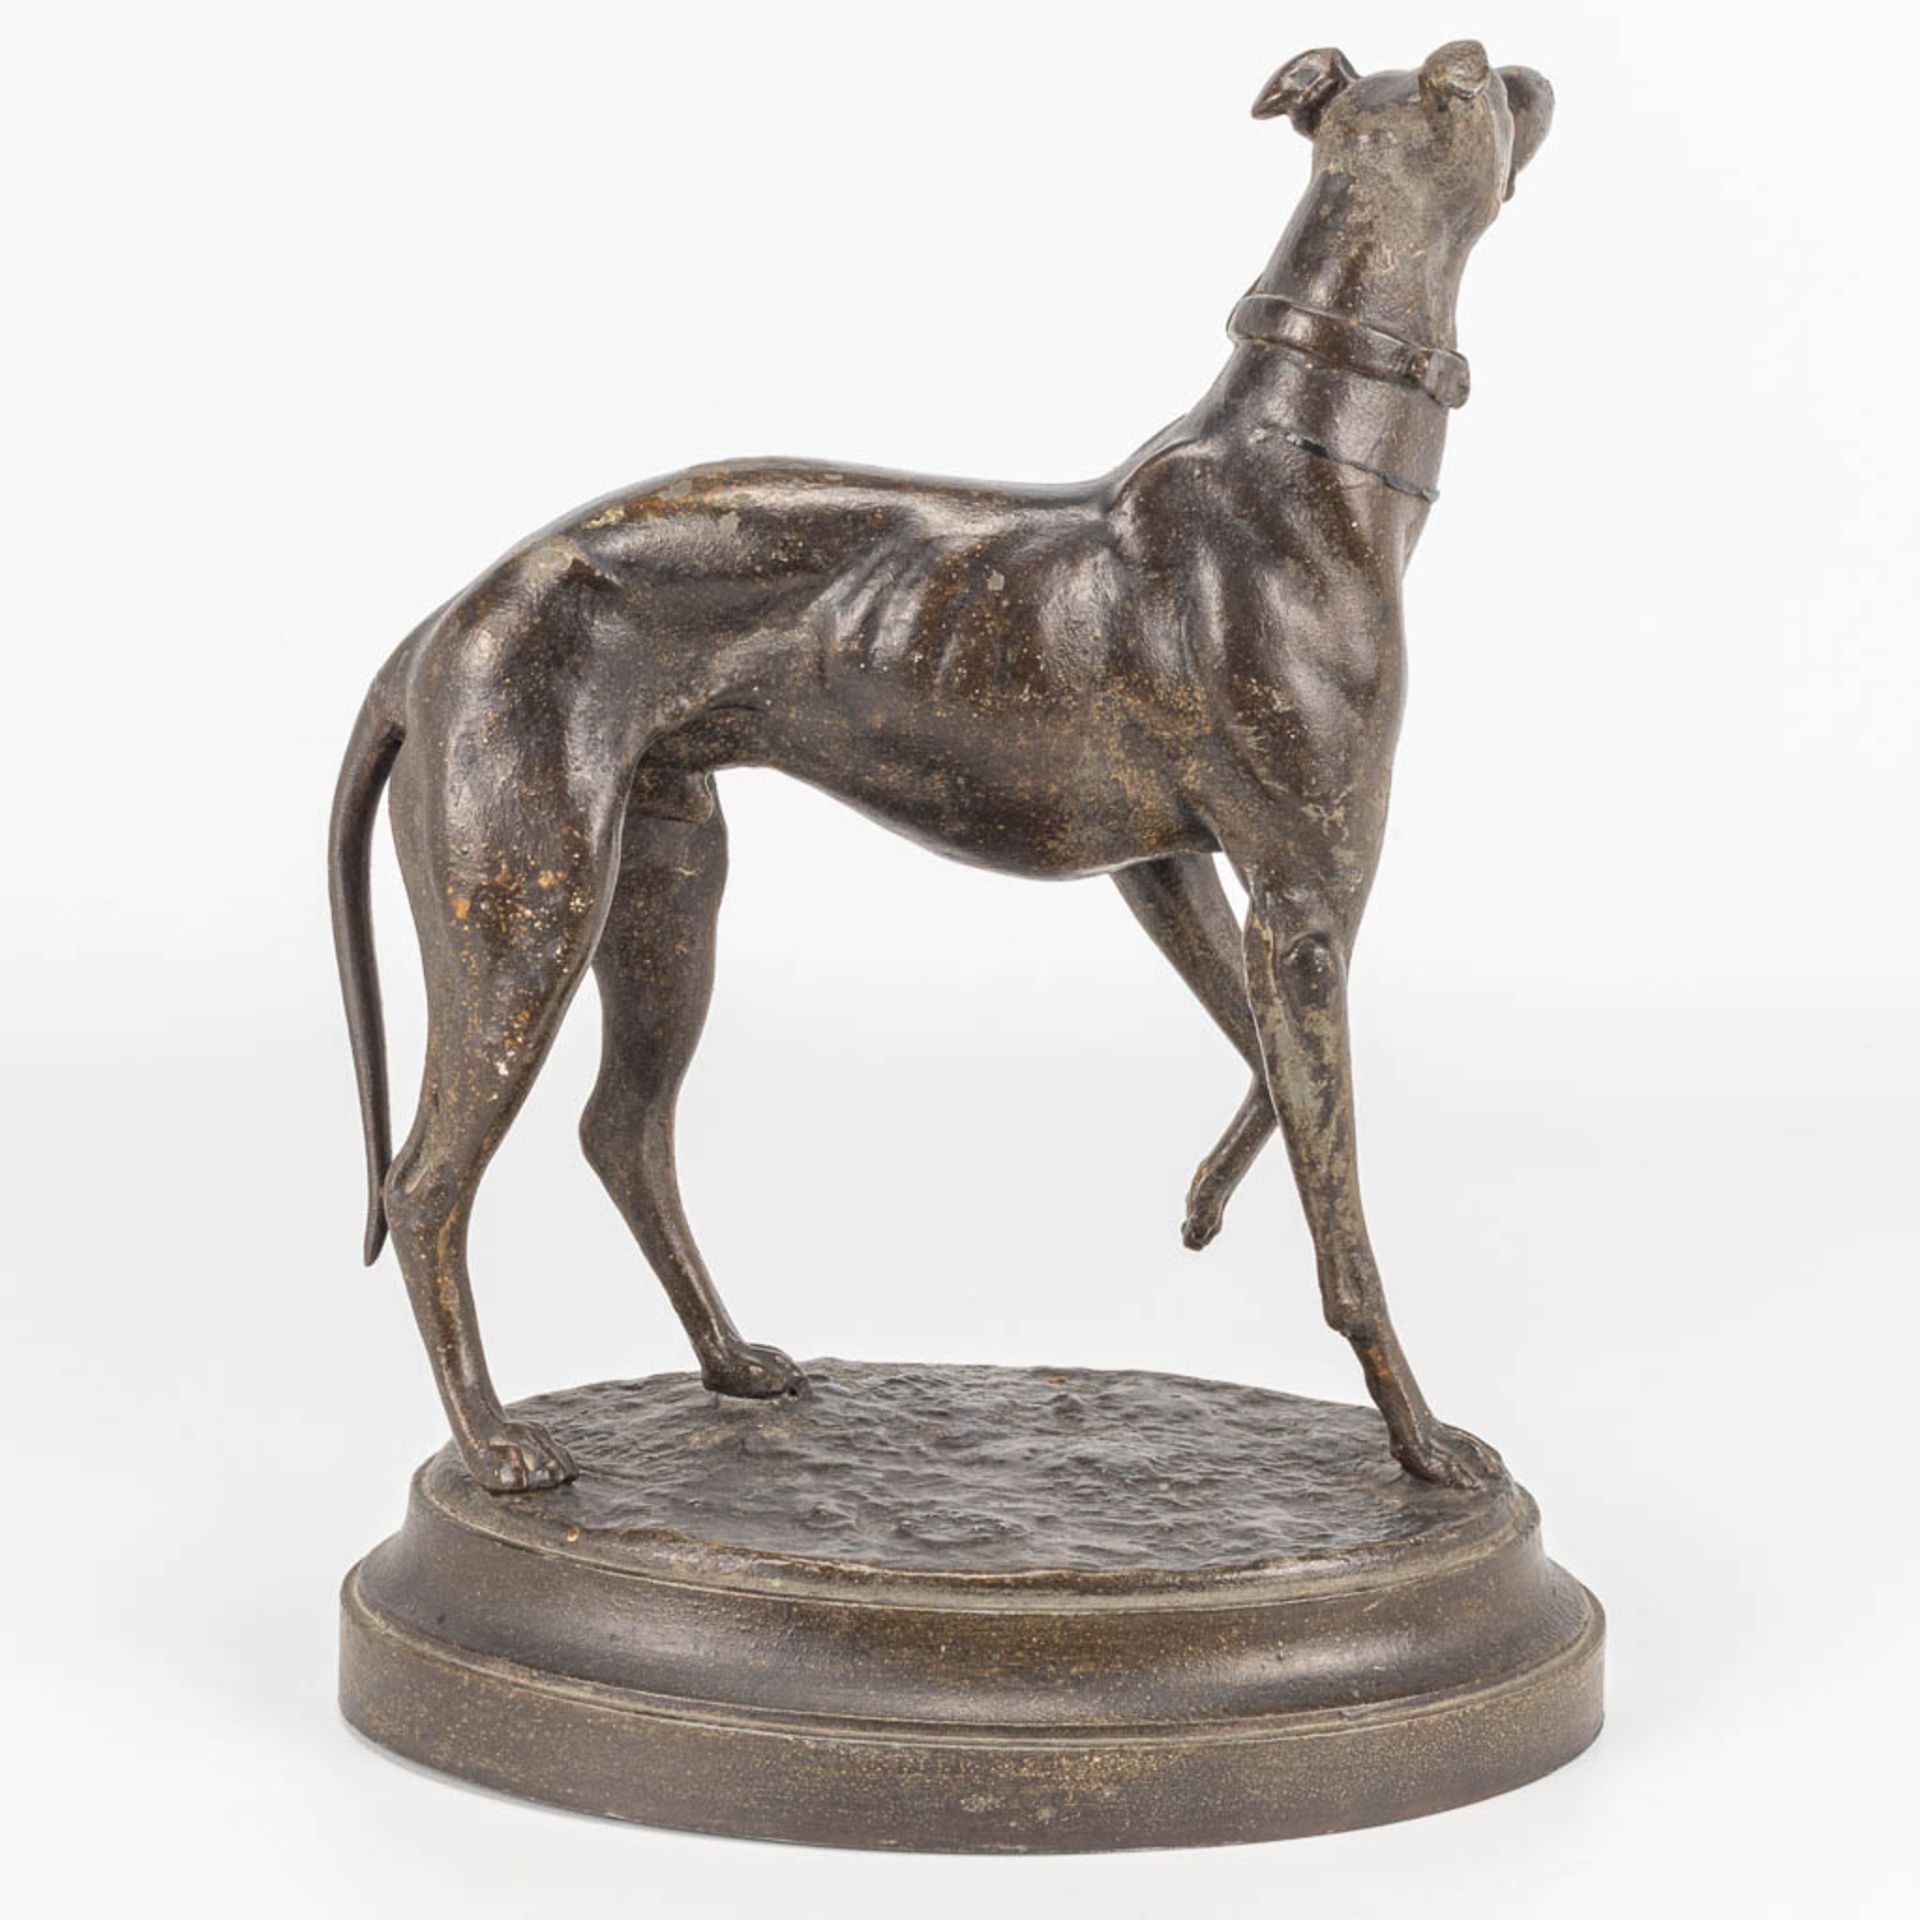 A statue of a greyhound made of spelter, Illegibly signed. - Image 8 of 12